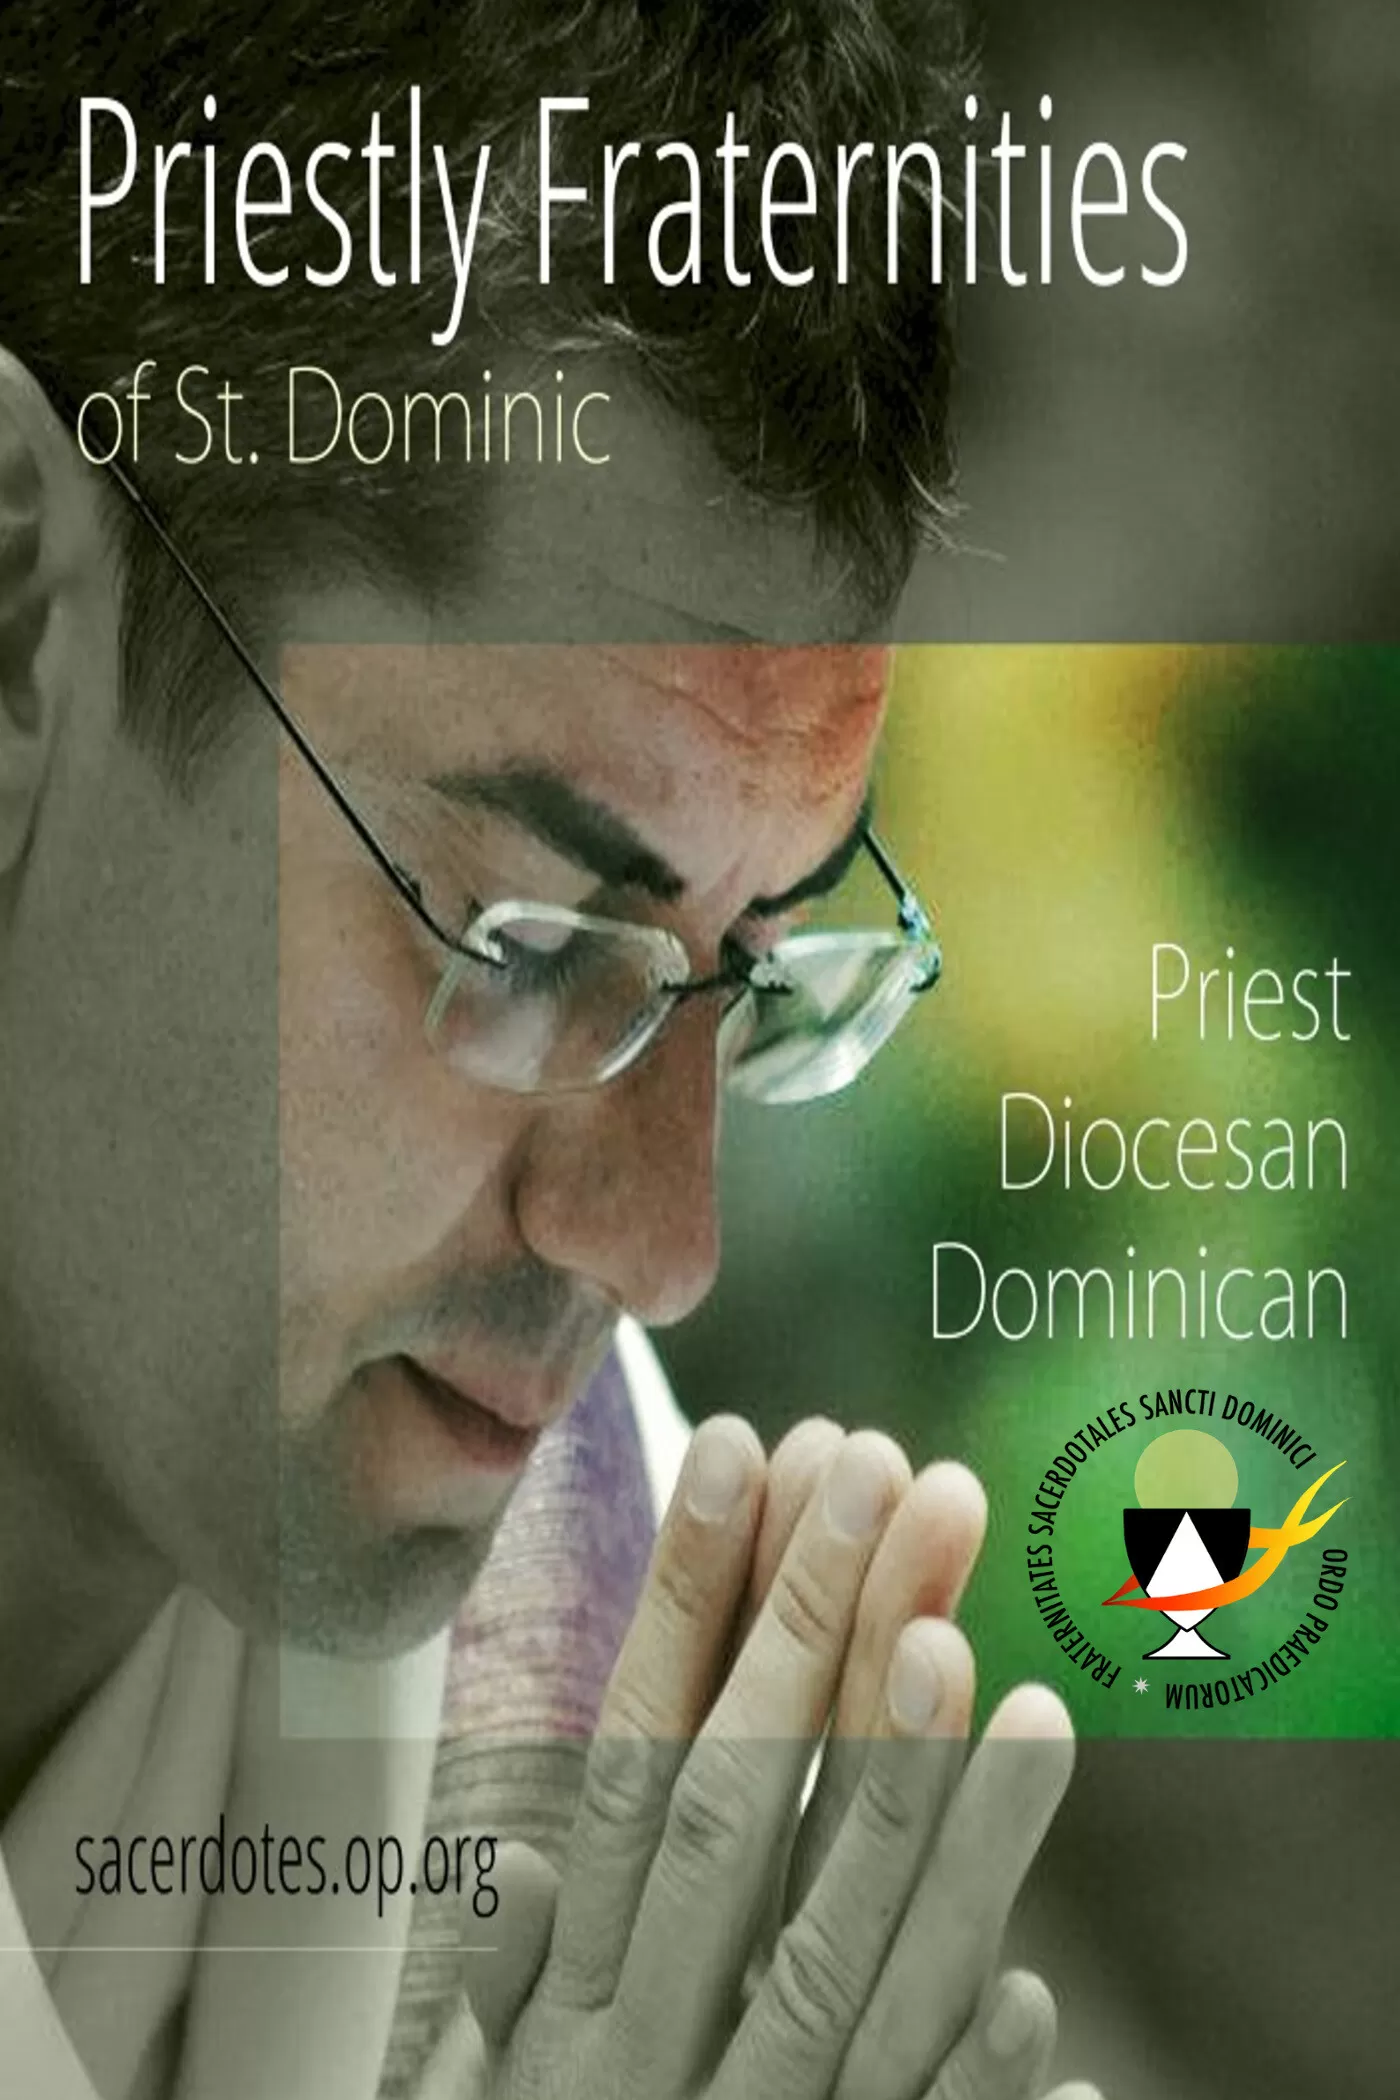 Priestly Fraternities of St. Dominic